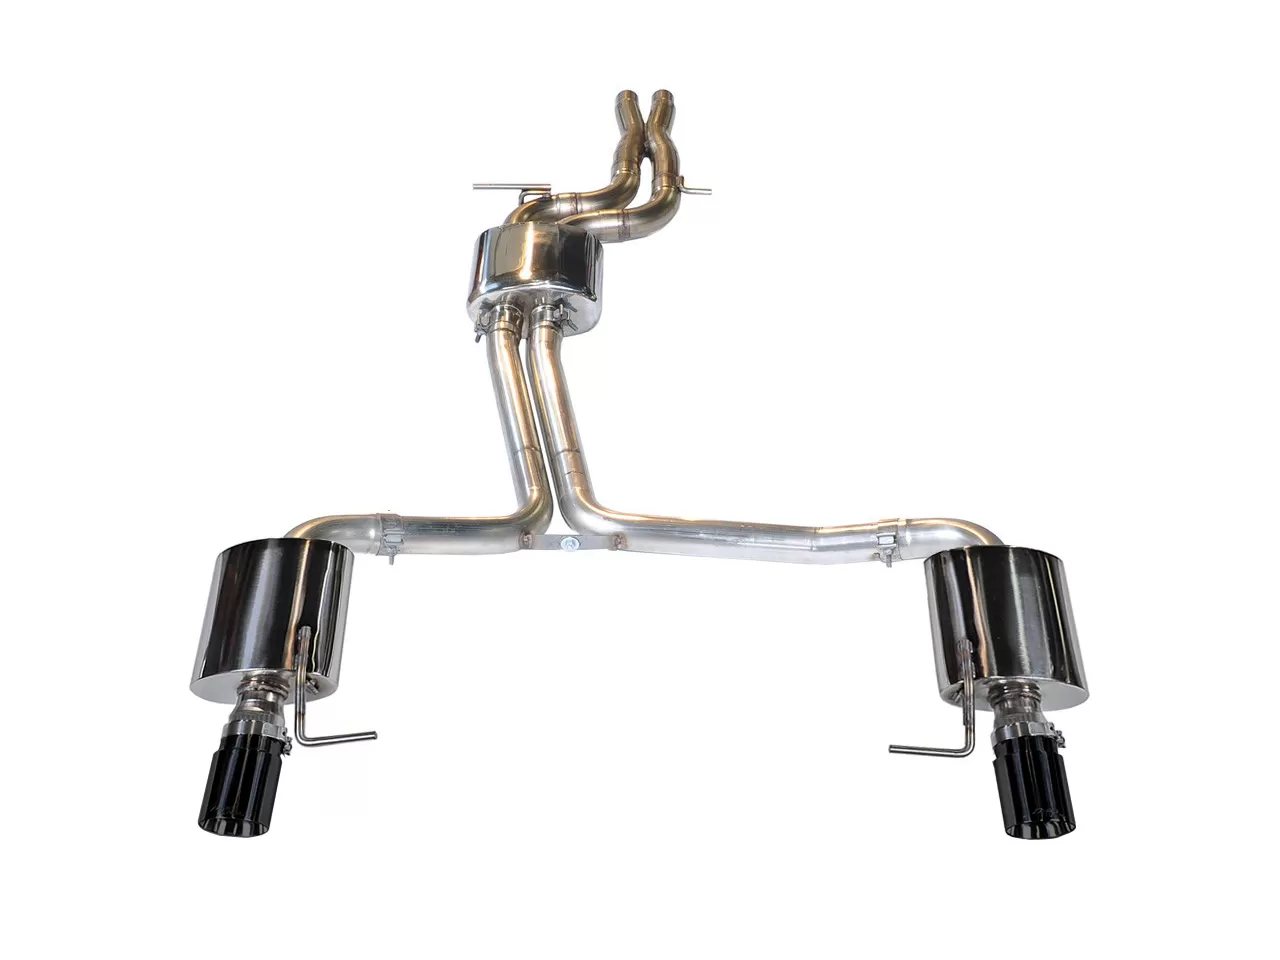 AWE Touring Edition Exhaust for Audi C7 A6 3.0T - Dual Outlet, Diamond Black Tips Audi A6 Quattro  2012-2015 - 3015-33052